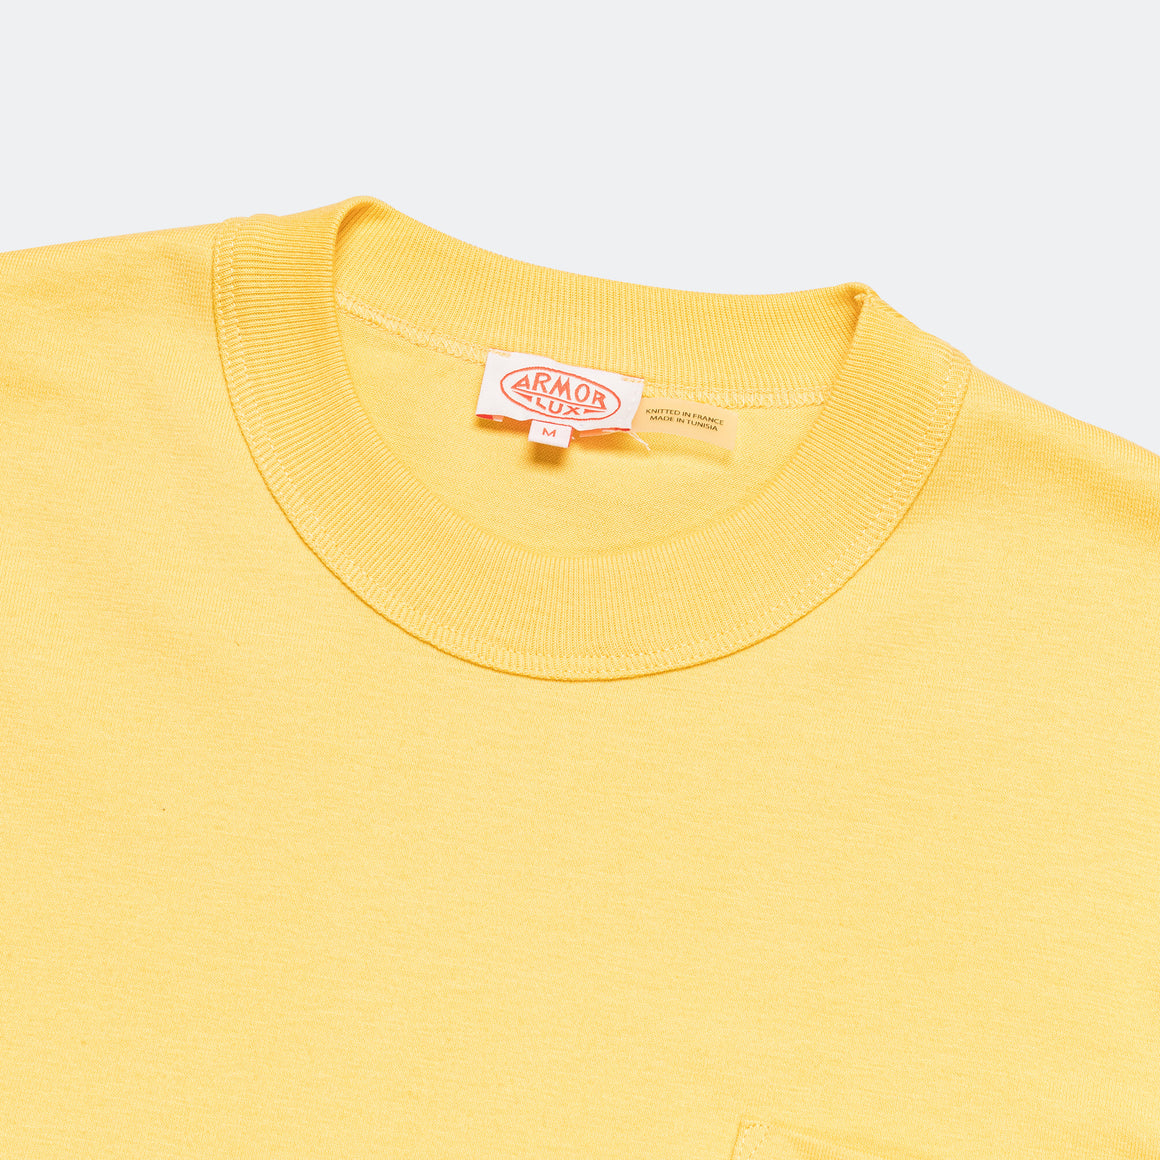 Armor Lux - Heritage Pocket T-Shirt - Yellow - UP THERE